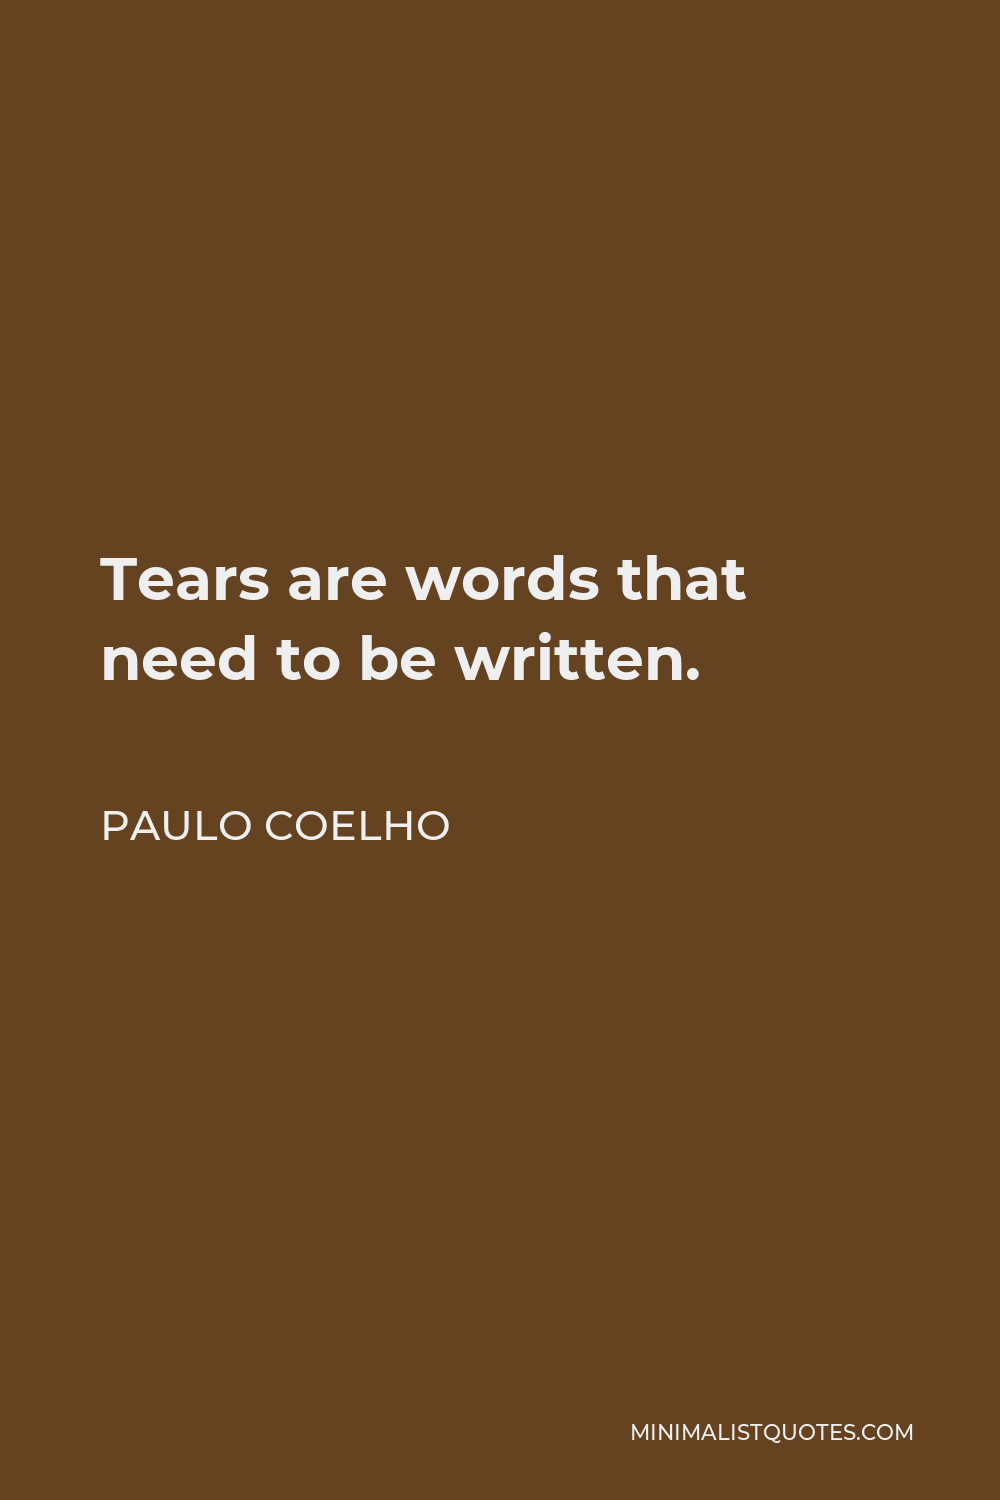 Paulo Coelho Quote - Tears are words that need to be written.